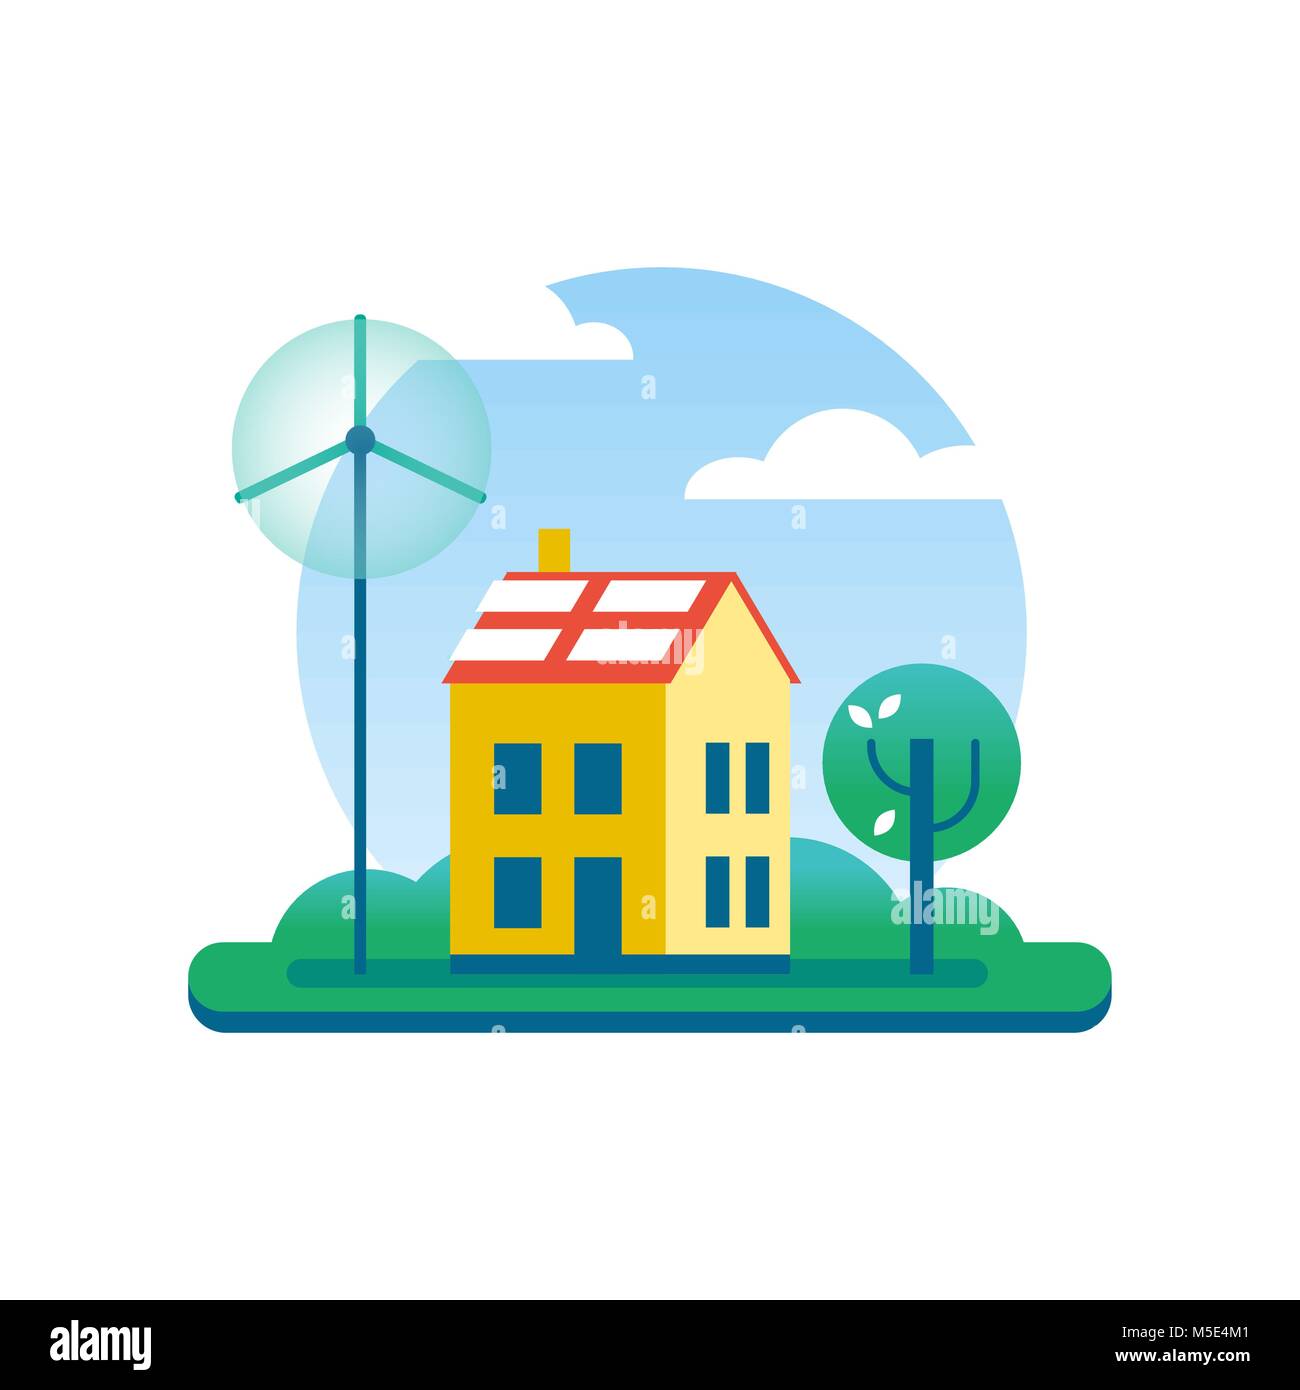 Eco friendly house illustration, clean energy sustainable home in flat art style with wind turbine, solar panels and tree for green environment conser Stock Vector